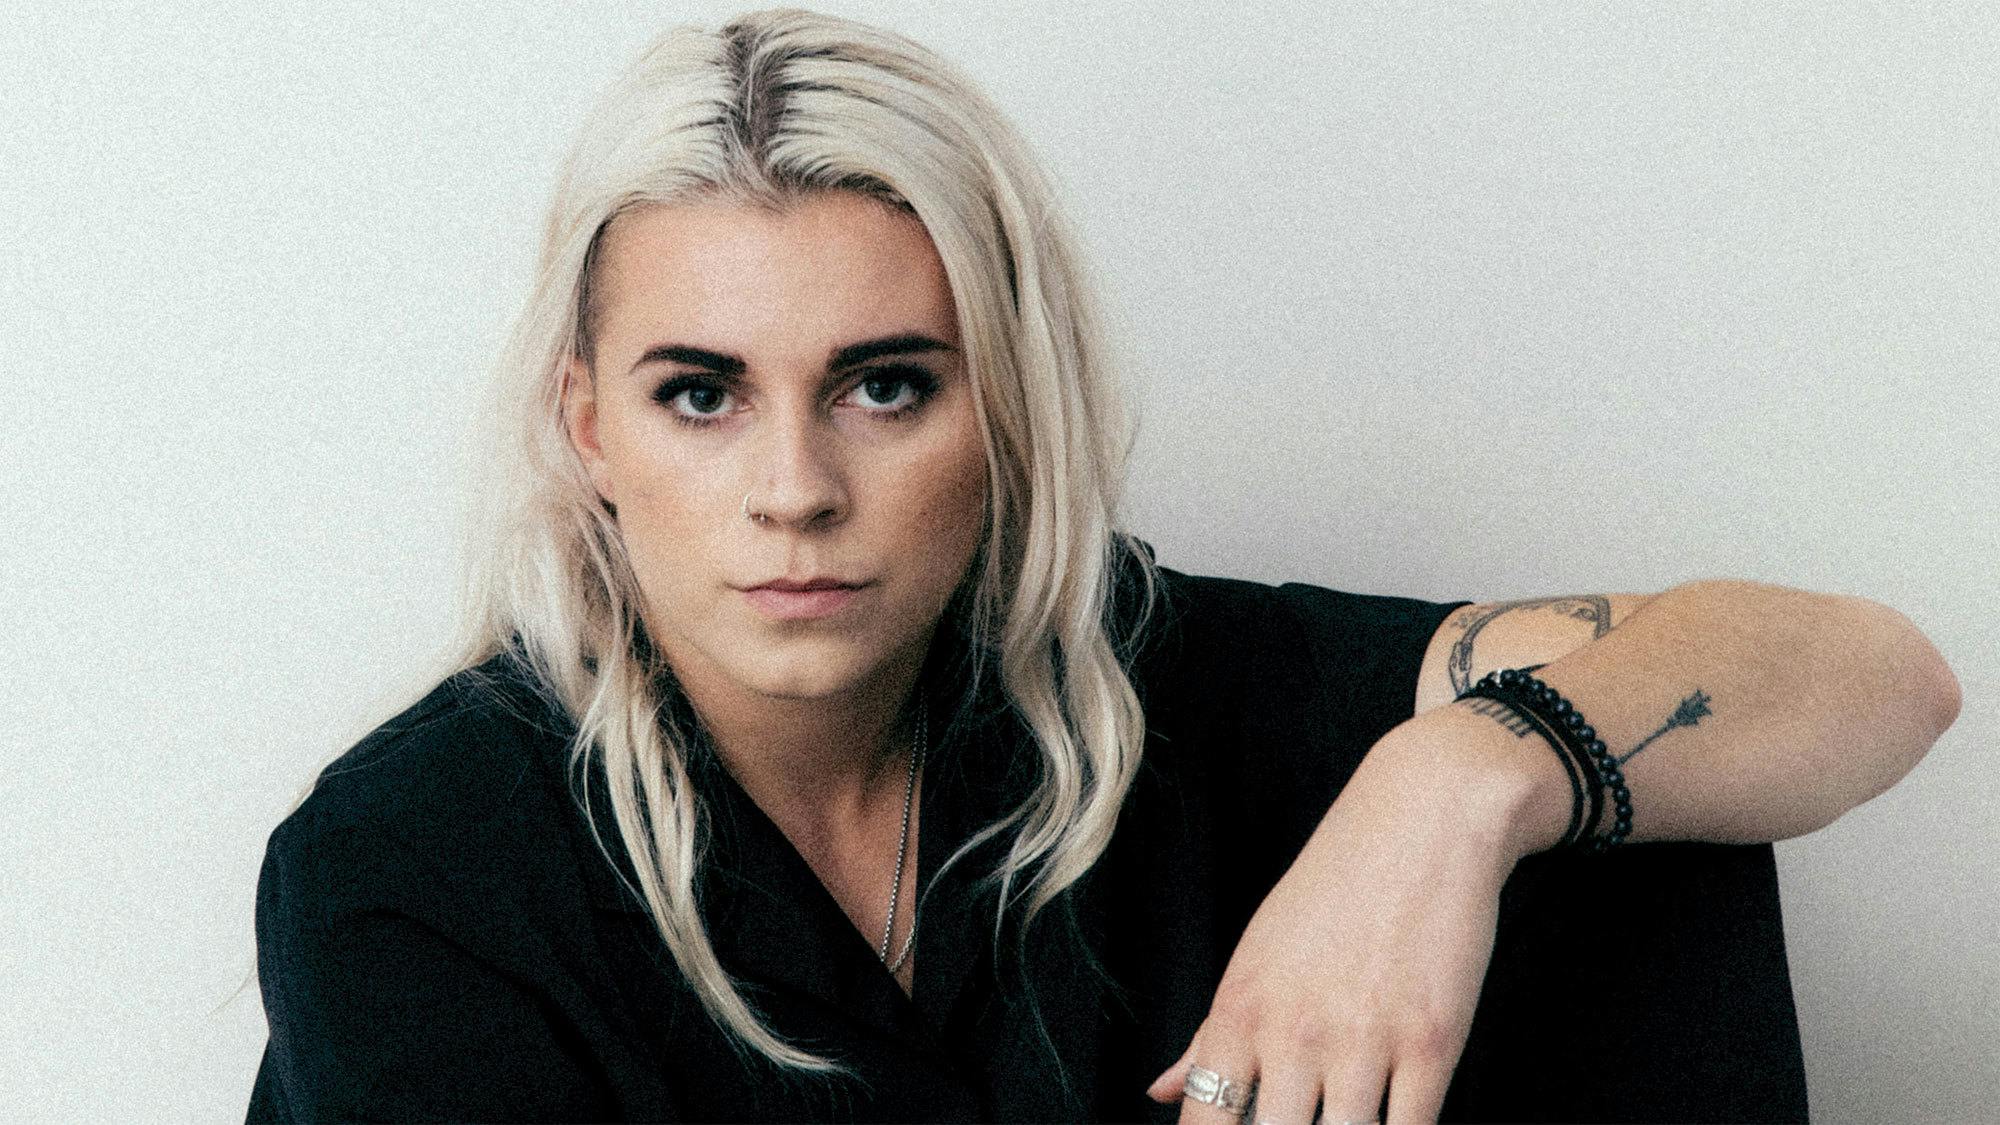 PVRIS' Lynn Gunn: "I Needed To Get Back To A Better Place, Mentally And Physically"